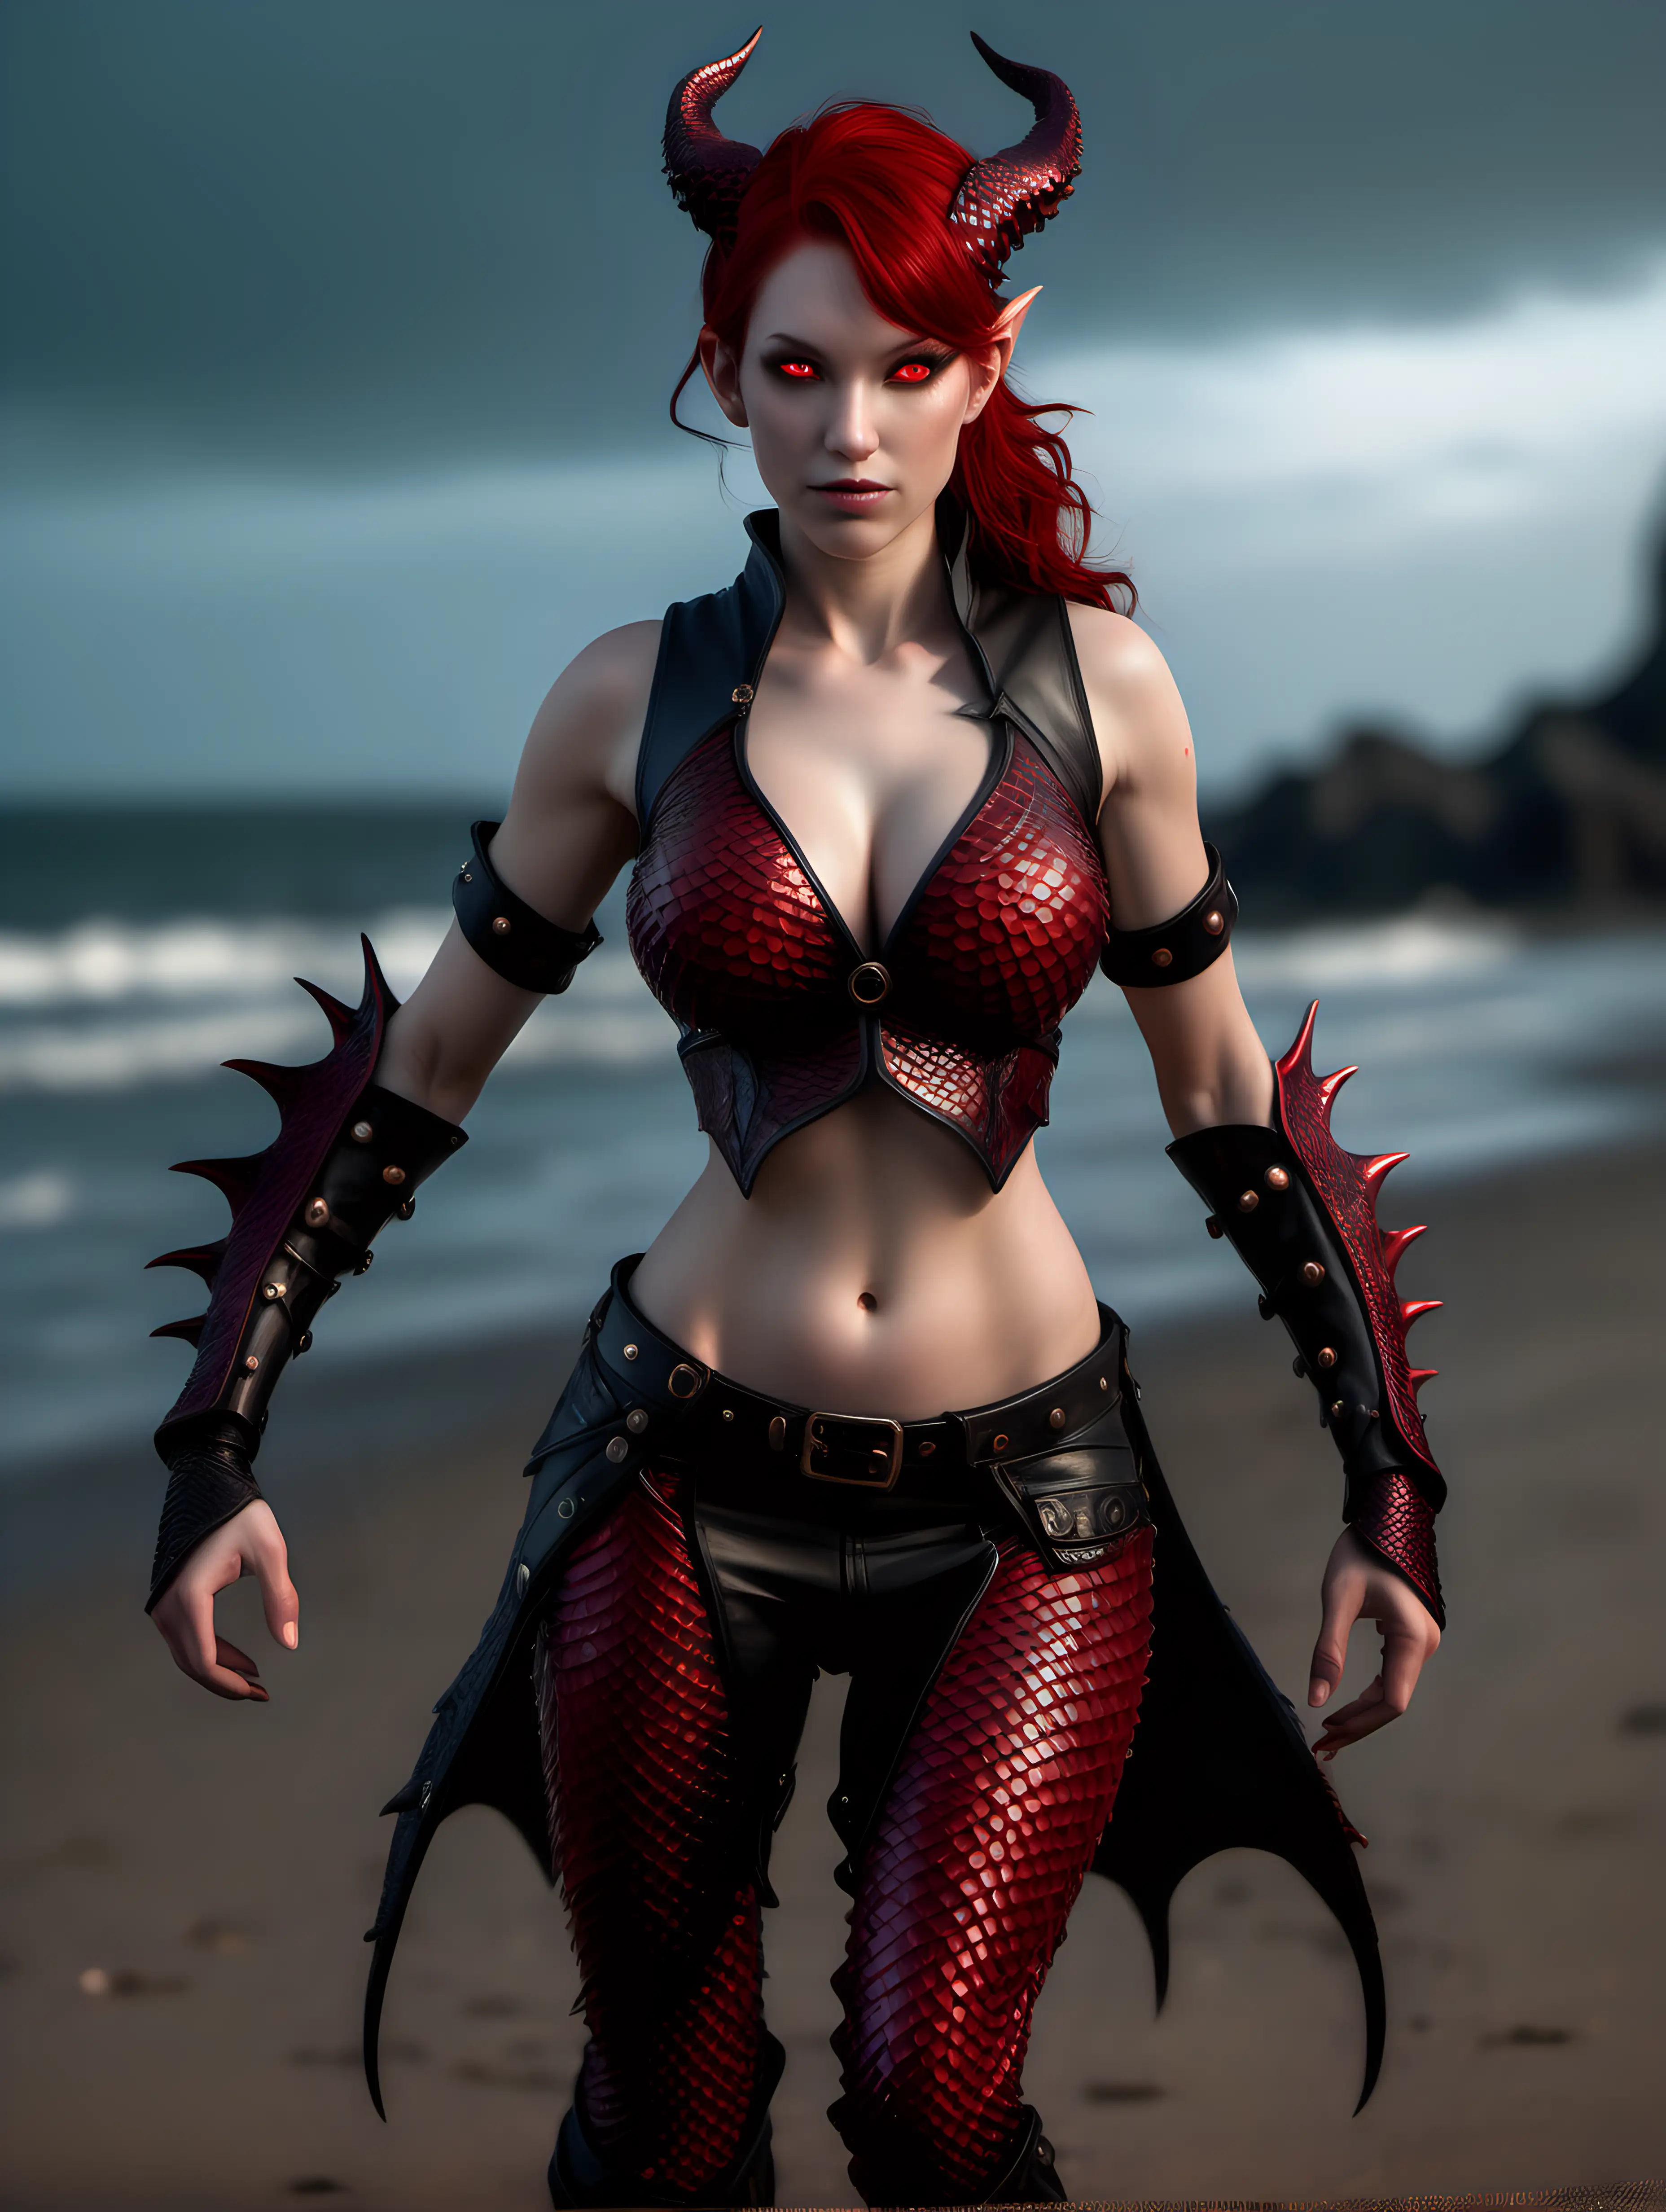 ultra-realistic high resolution and highly detailed photograph of a female dragonrider, with black sleek pointy horns gently swept straight backwards over head, large breasts, red hair, red eyes, sleeveless open front top made of red dragonscales, low pants made of black dragonscales, and draconic runes carved into arms and body, she is walking on a beach in the evening